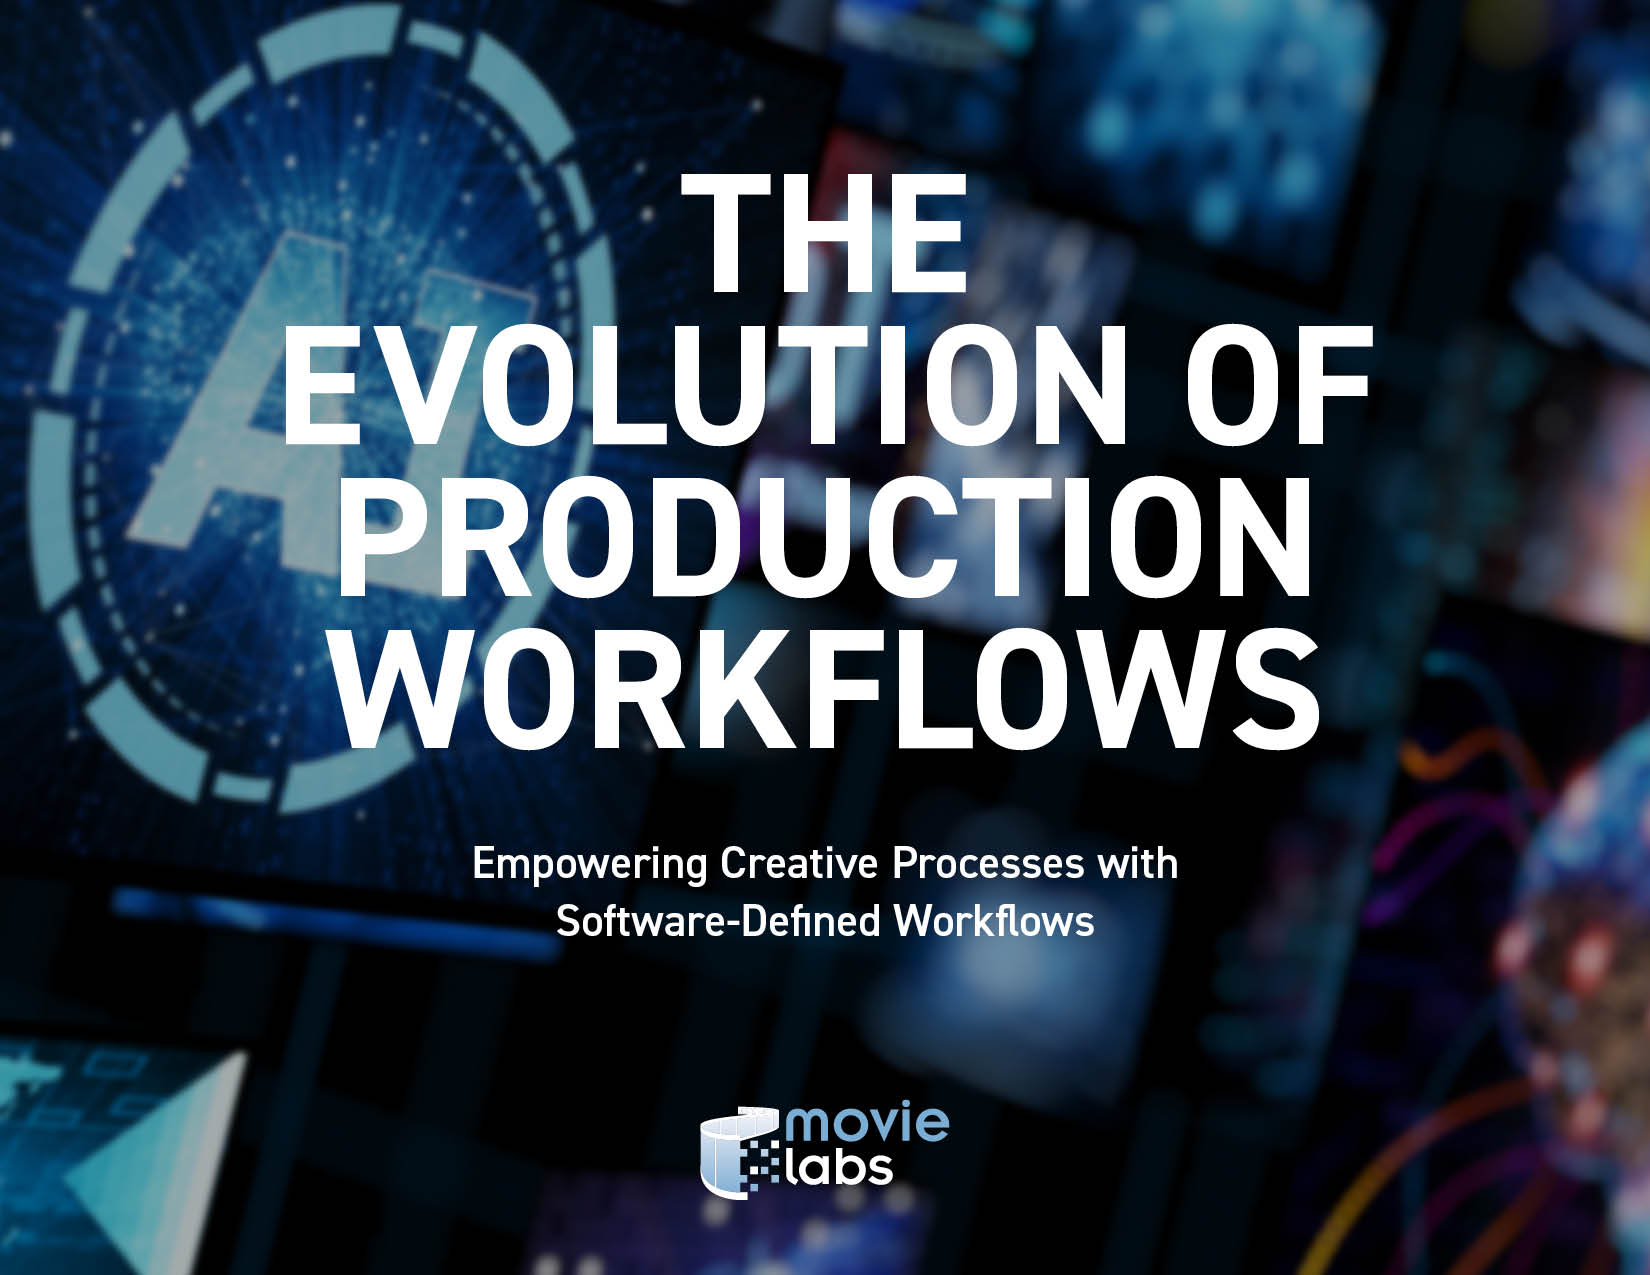 Our New 2030 Vision Paper on Software-Defined Workflows